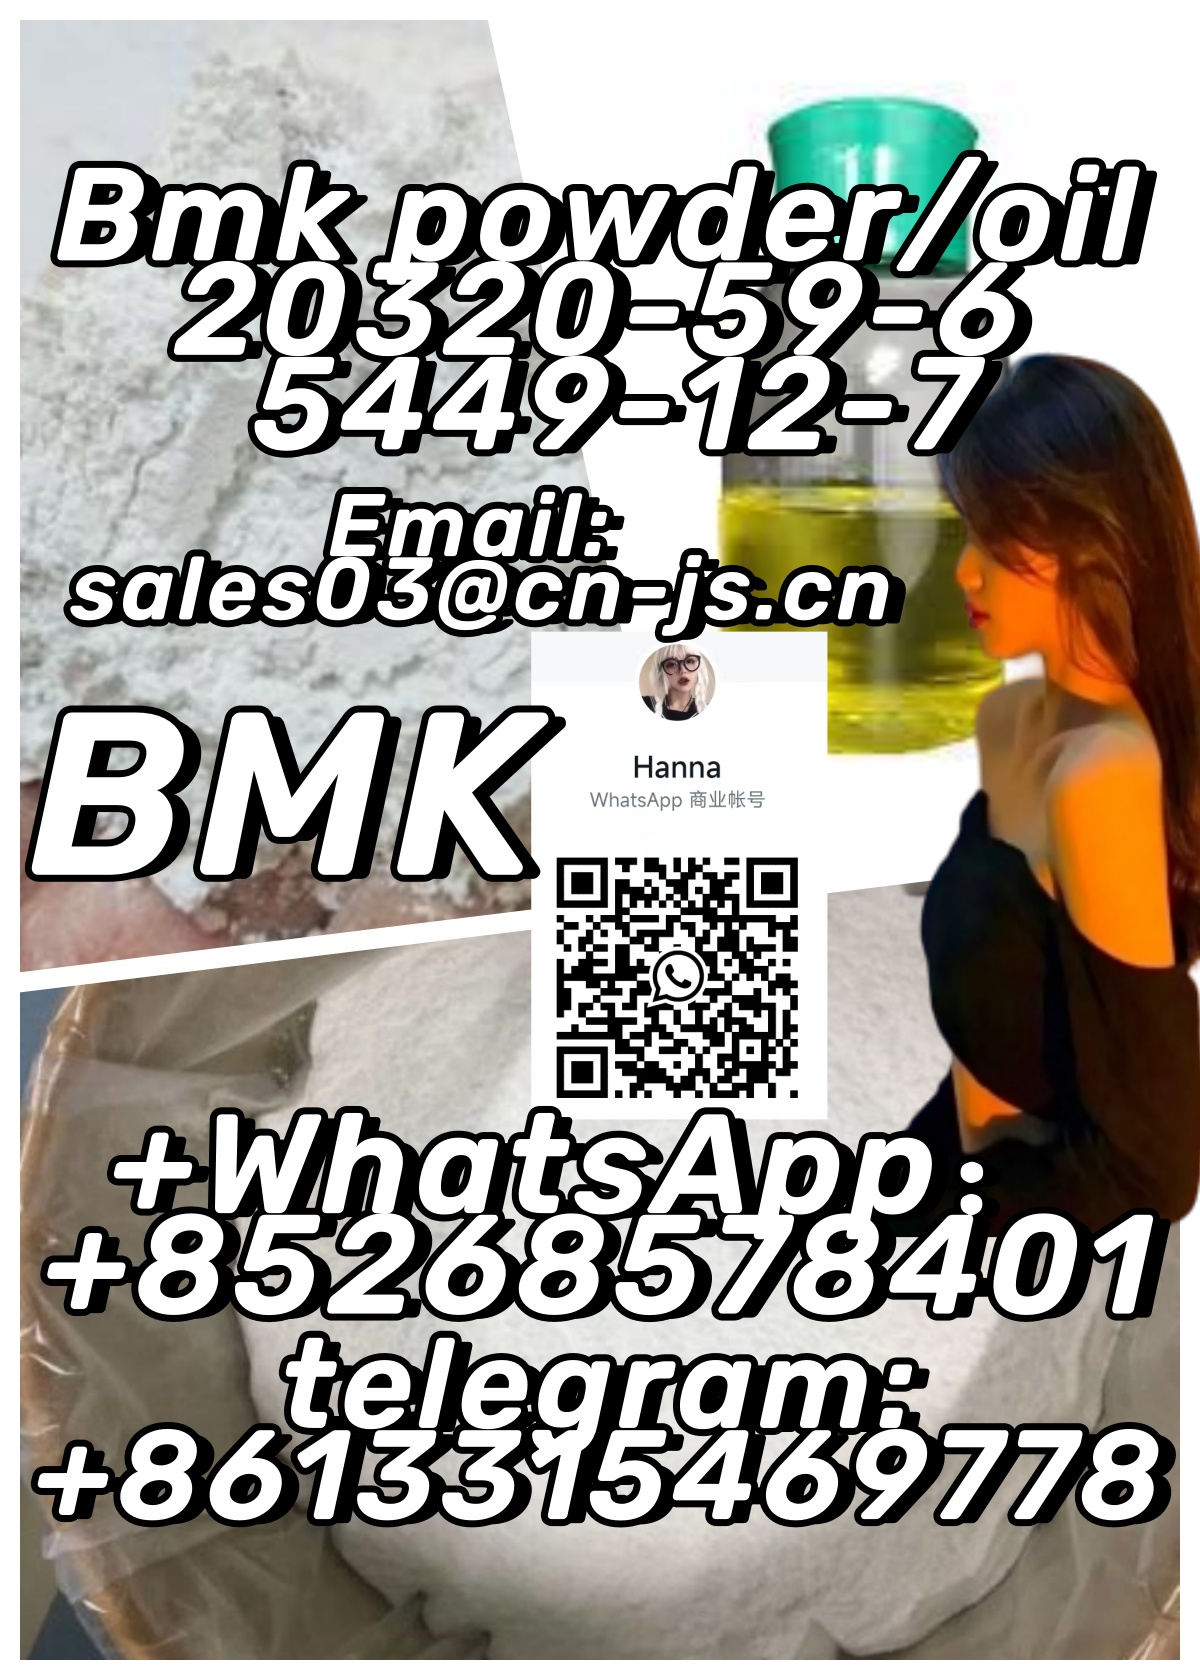 buy in stock BMK Powder/Oil 20320-59-6,埃斯卡尔德,Services,Free Classifieds,Post Free Ads,77traders.com